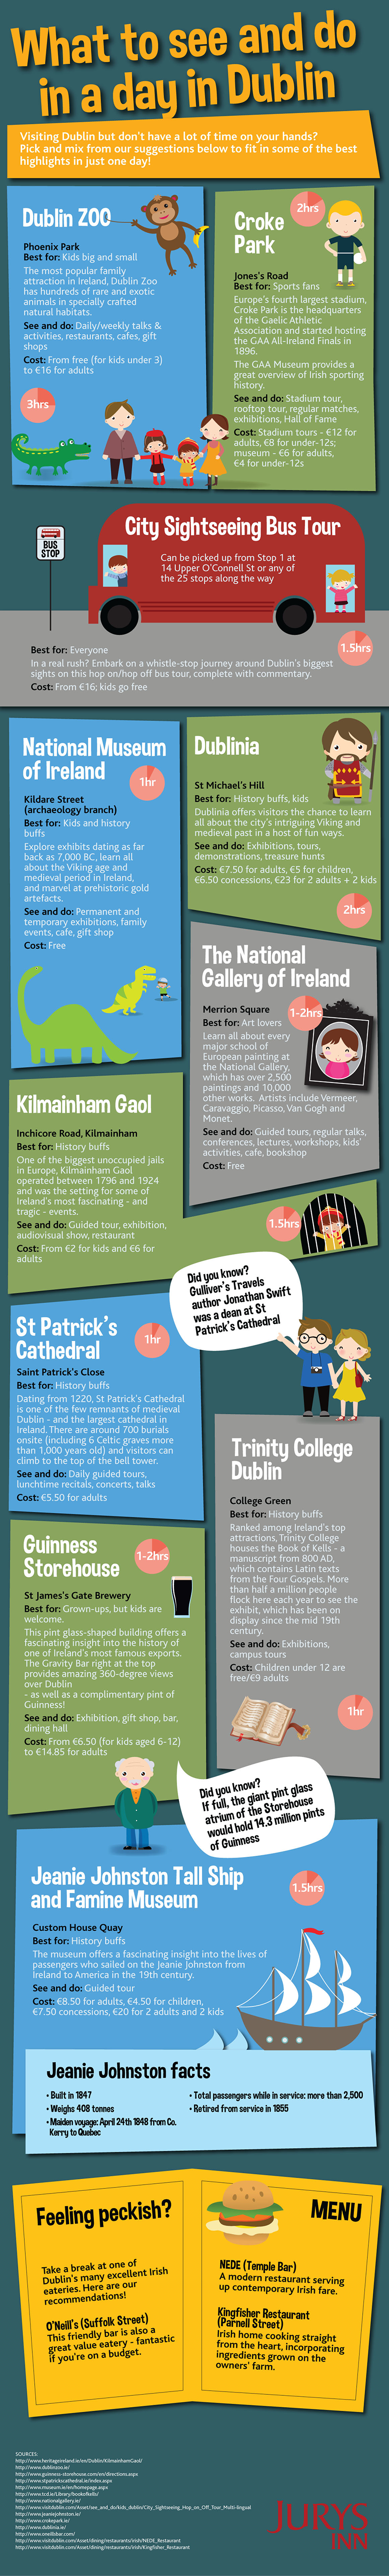 Infographic - What to See and Do in Dublin in a day